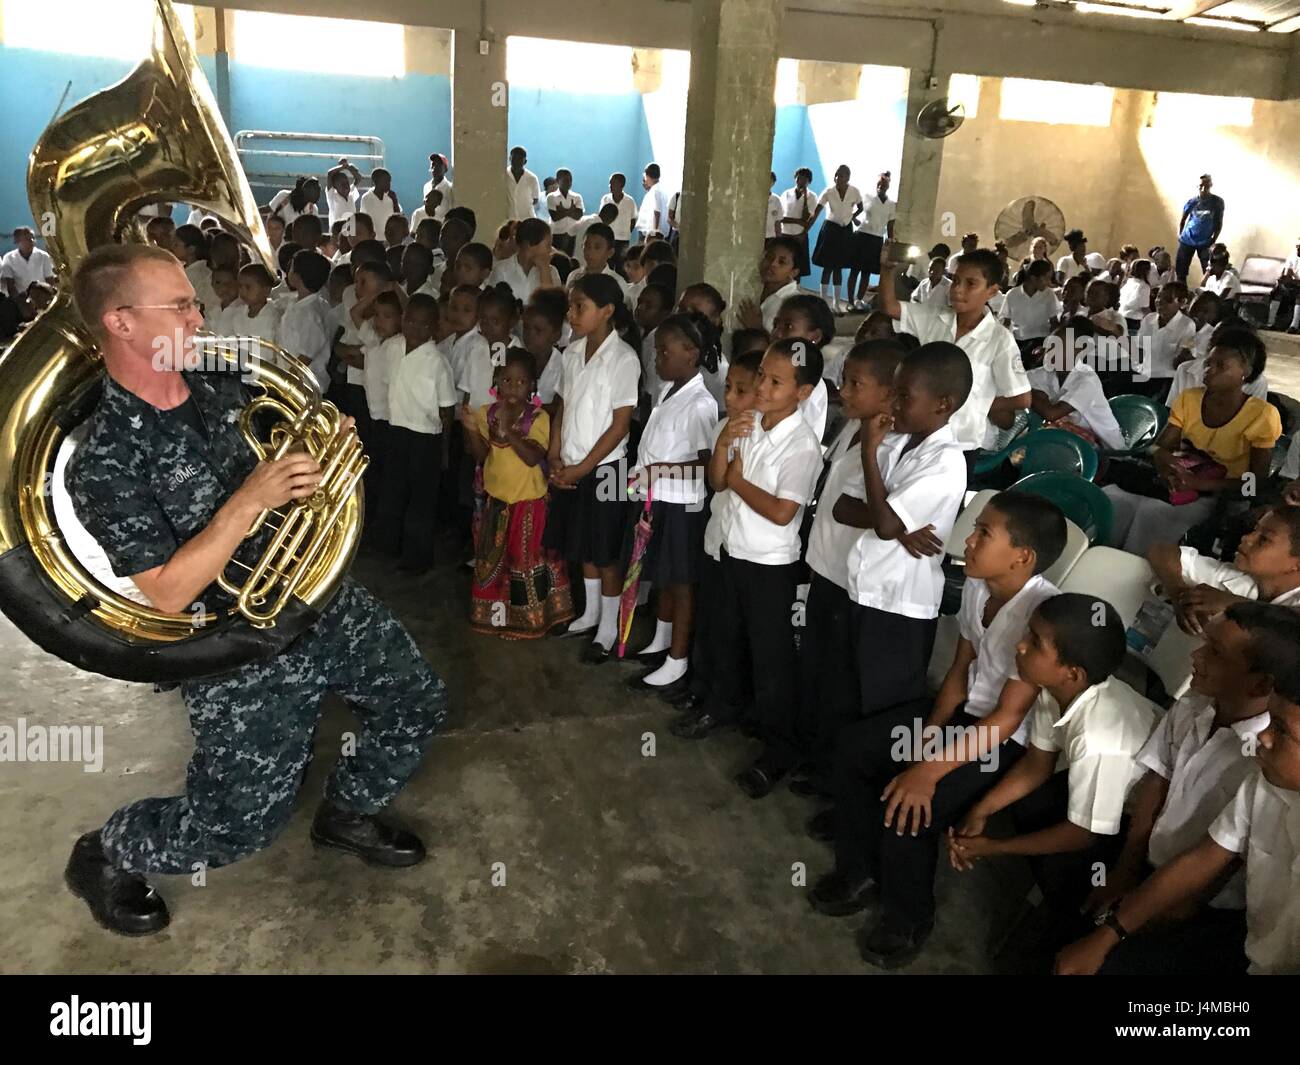 170222-N-YL073-004   SANTA FE, Honduras (Feb. 22, 2017) Musician 1st Class Christopher Jerome, assigned to the U.S. Fleet Forces Band, plays the sousaphone for host nation children in support of Continuing Promise 2017 in Trujillo, Honduras. CP-17 is a U.S. Southern Command-sponsored and U.S. Naval Forces Southern Command/U.S. 4th Fleet-conducted deployment to conduct civil-military operations including humanitarian assistance, training engagements, and medical, dental, and veterinary support to Central and South America. (U.S. Navy photo by Mass Communication Specialist 2nd Class Shamira Puri Stock Photo